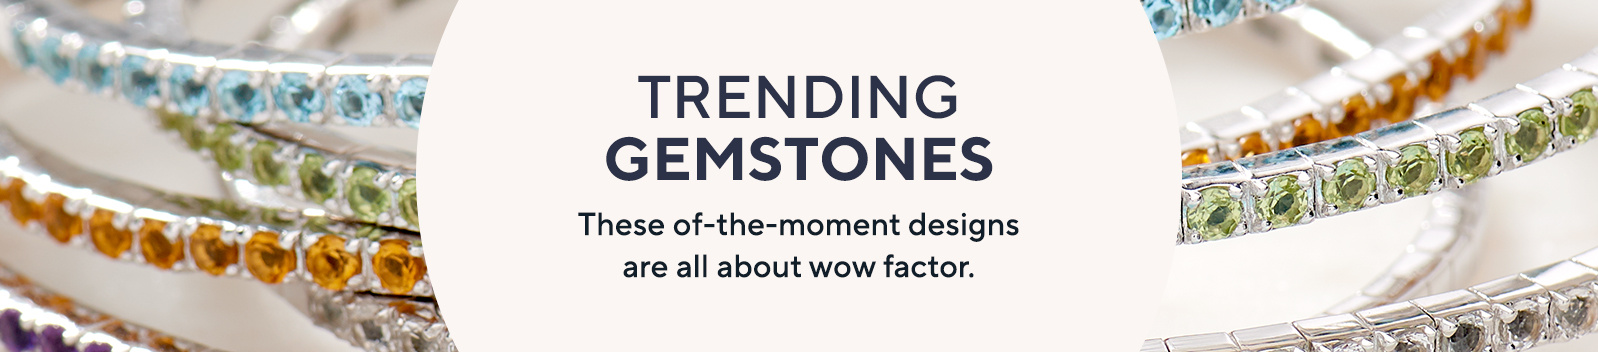 Trending Gemstones - These of-the-moment designs are all about wow factor. 